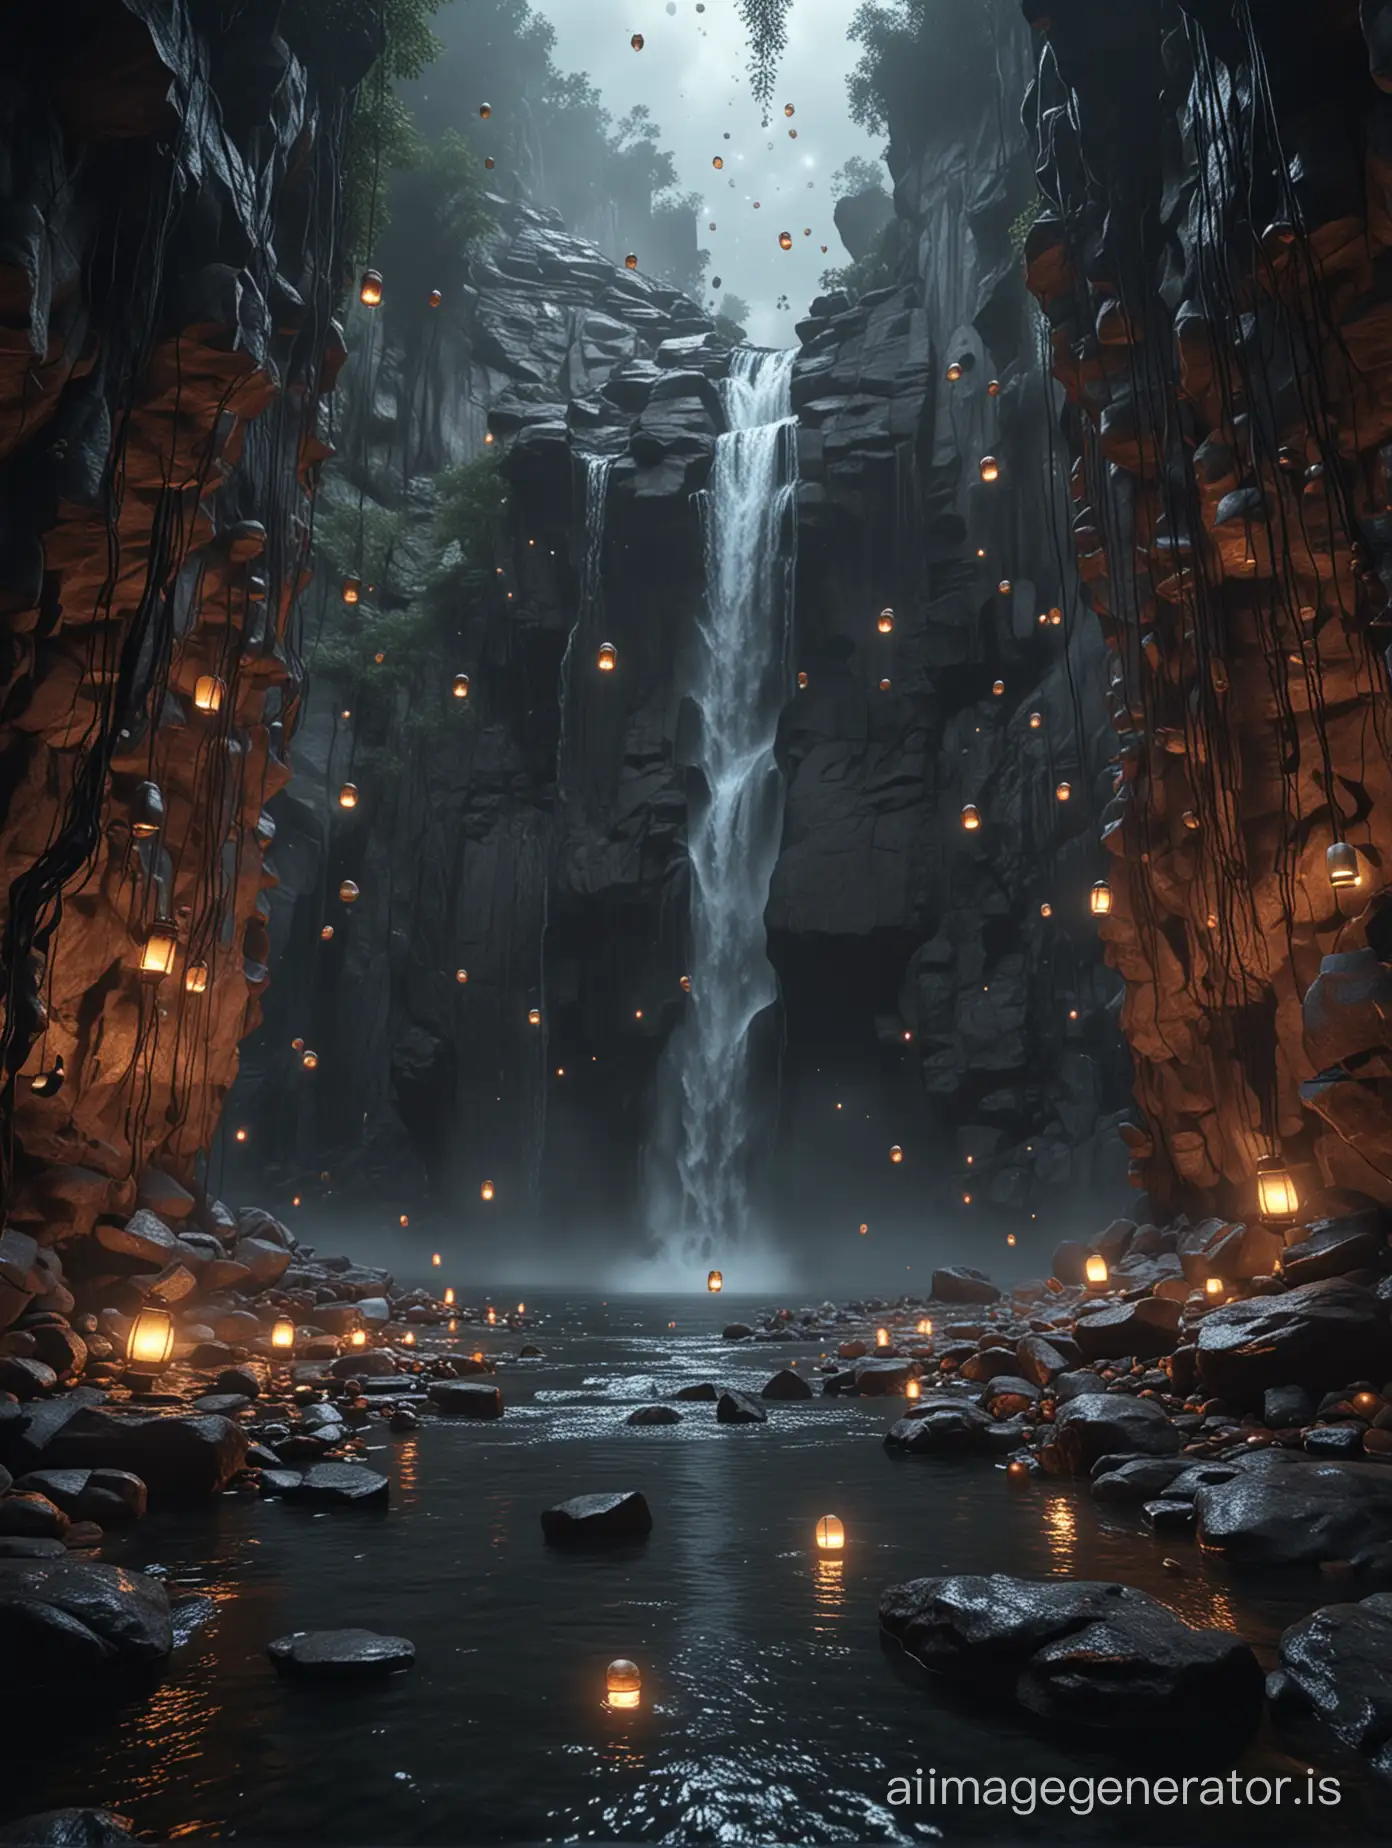 Apocalyptic-Waterfall-Scene-with-Floating-Lanterns